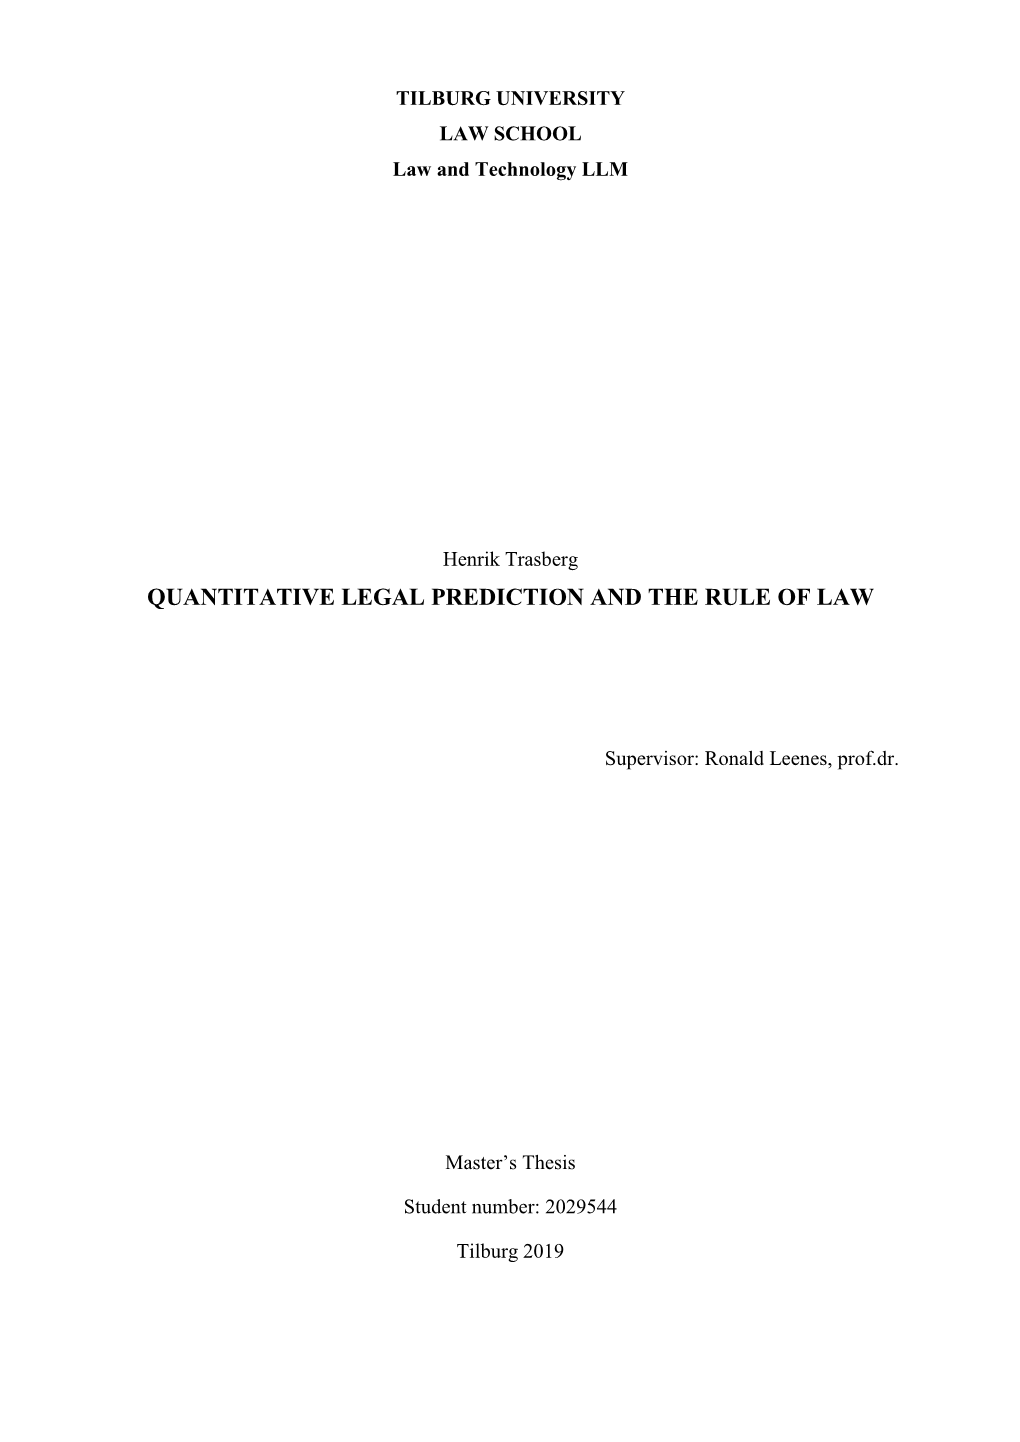 Quantitative Legal Prediction and the Rule of Law